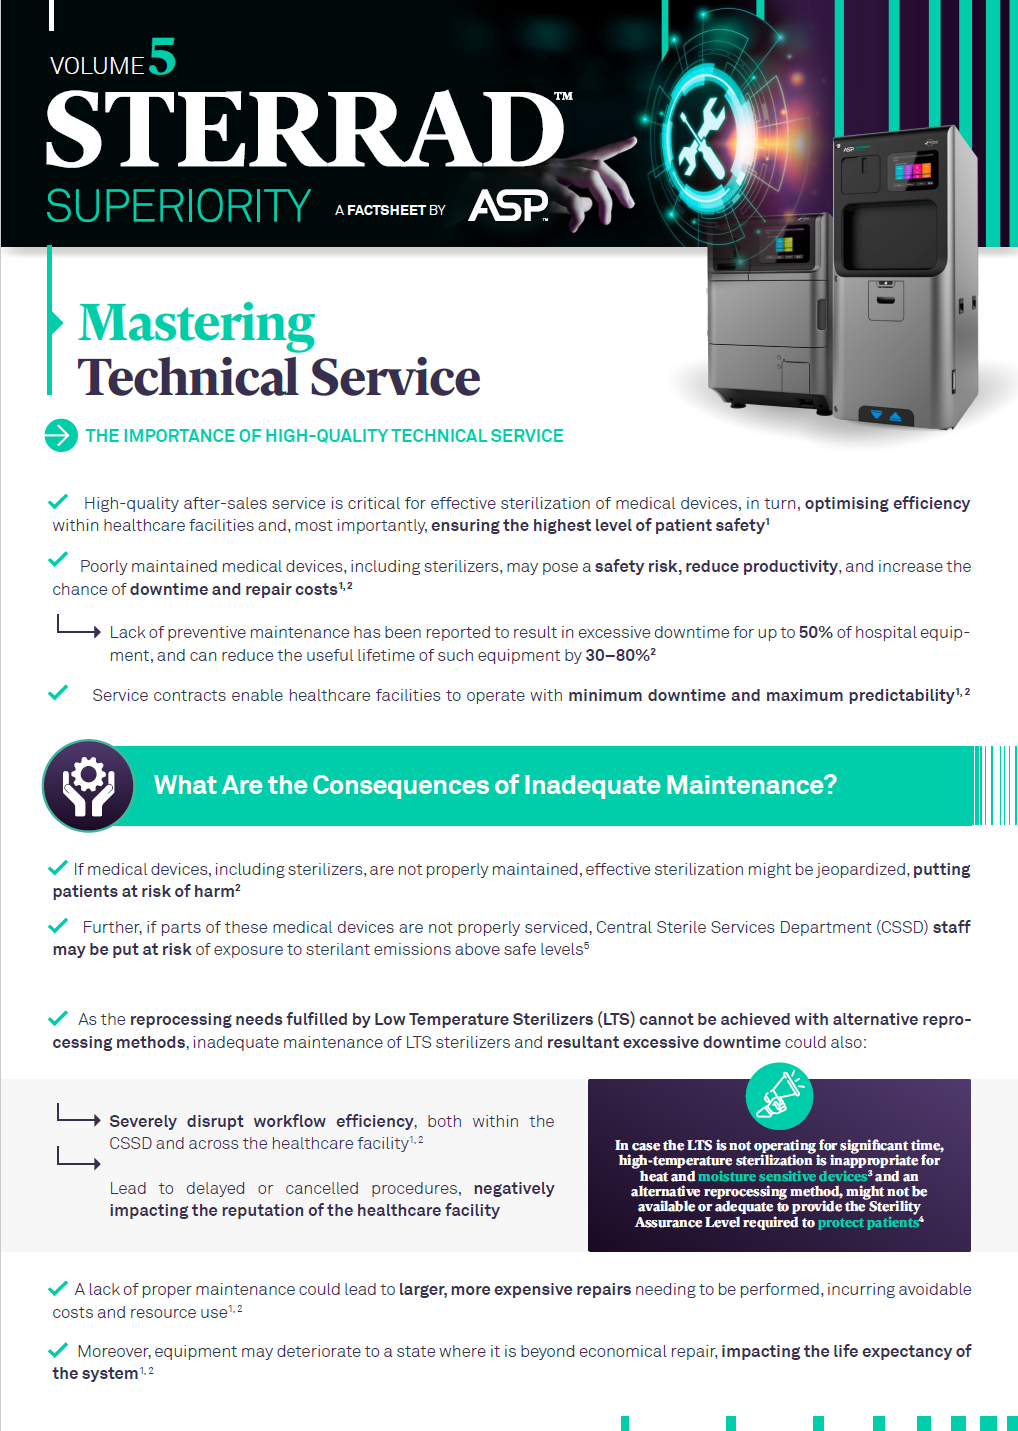 Mastering Technical Service